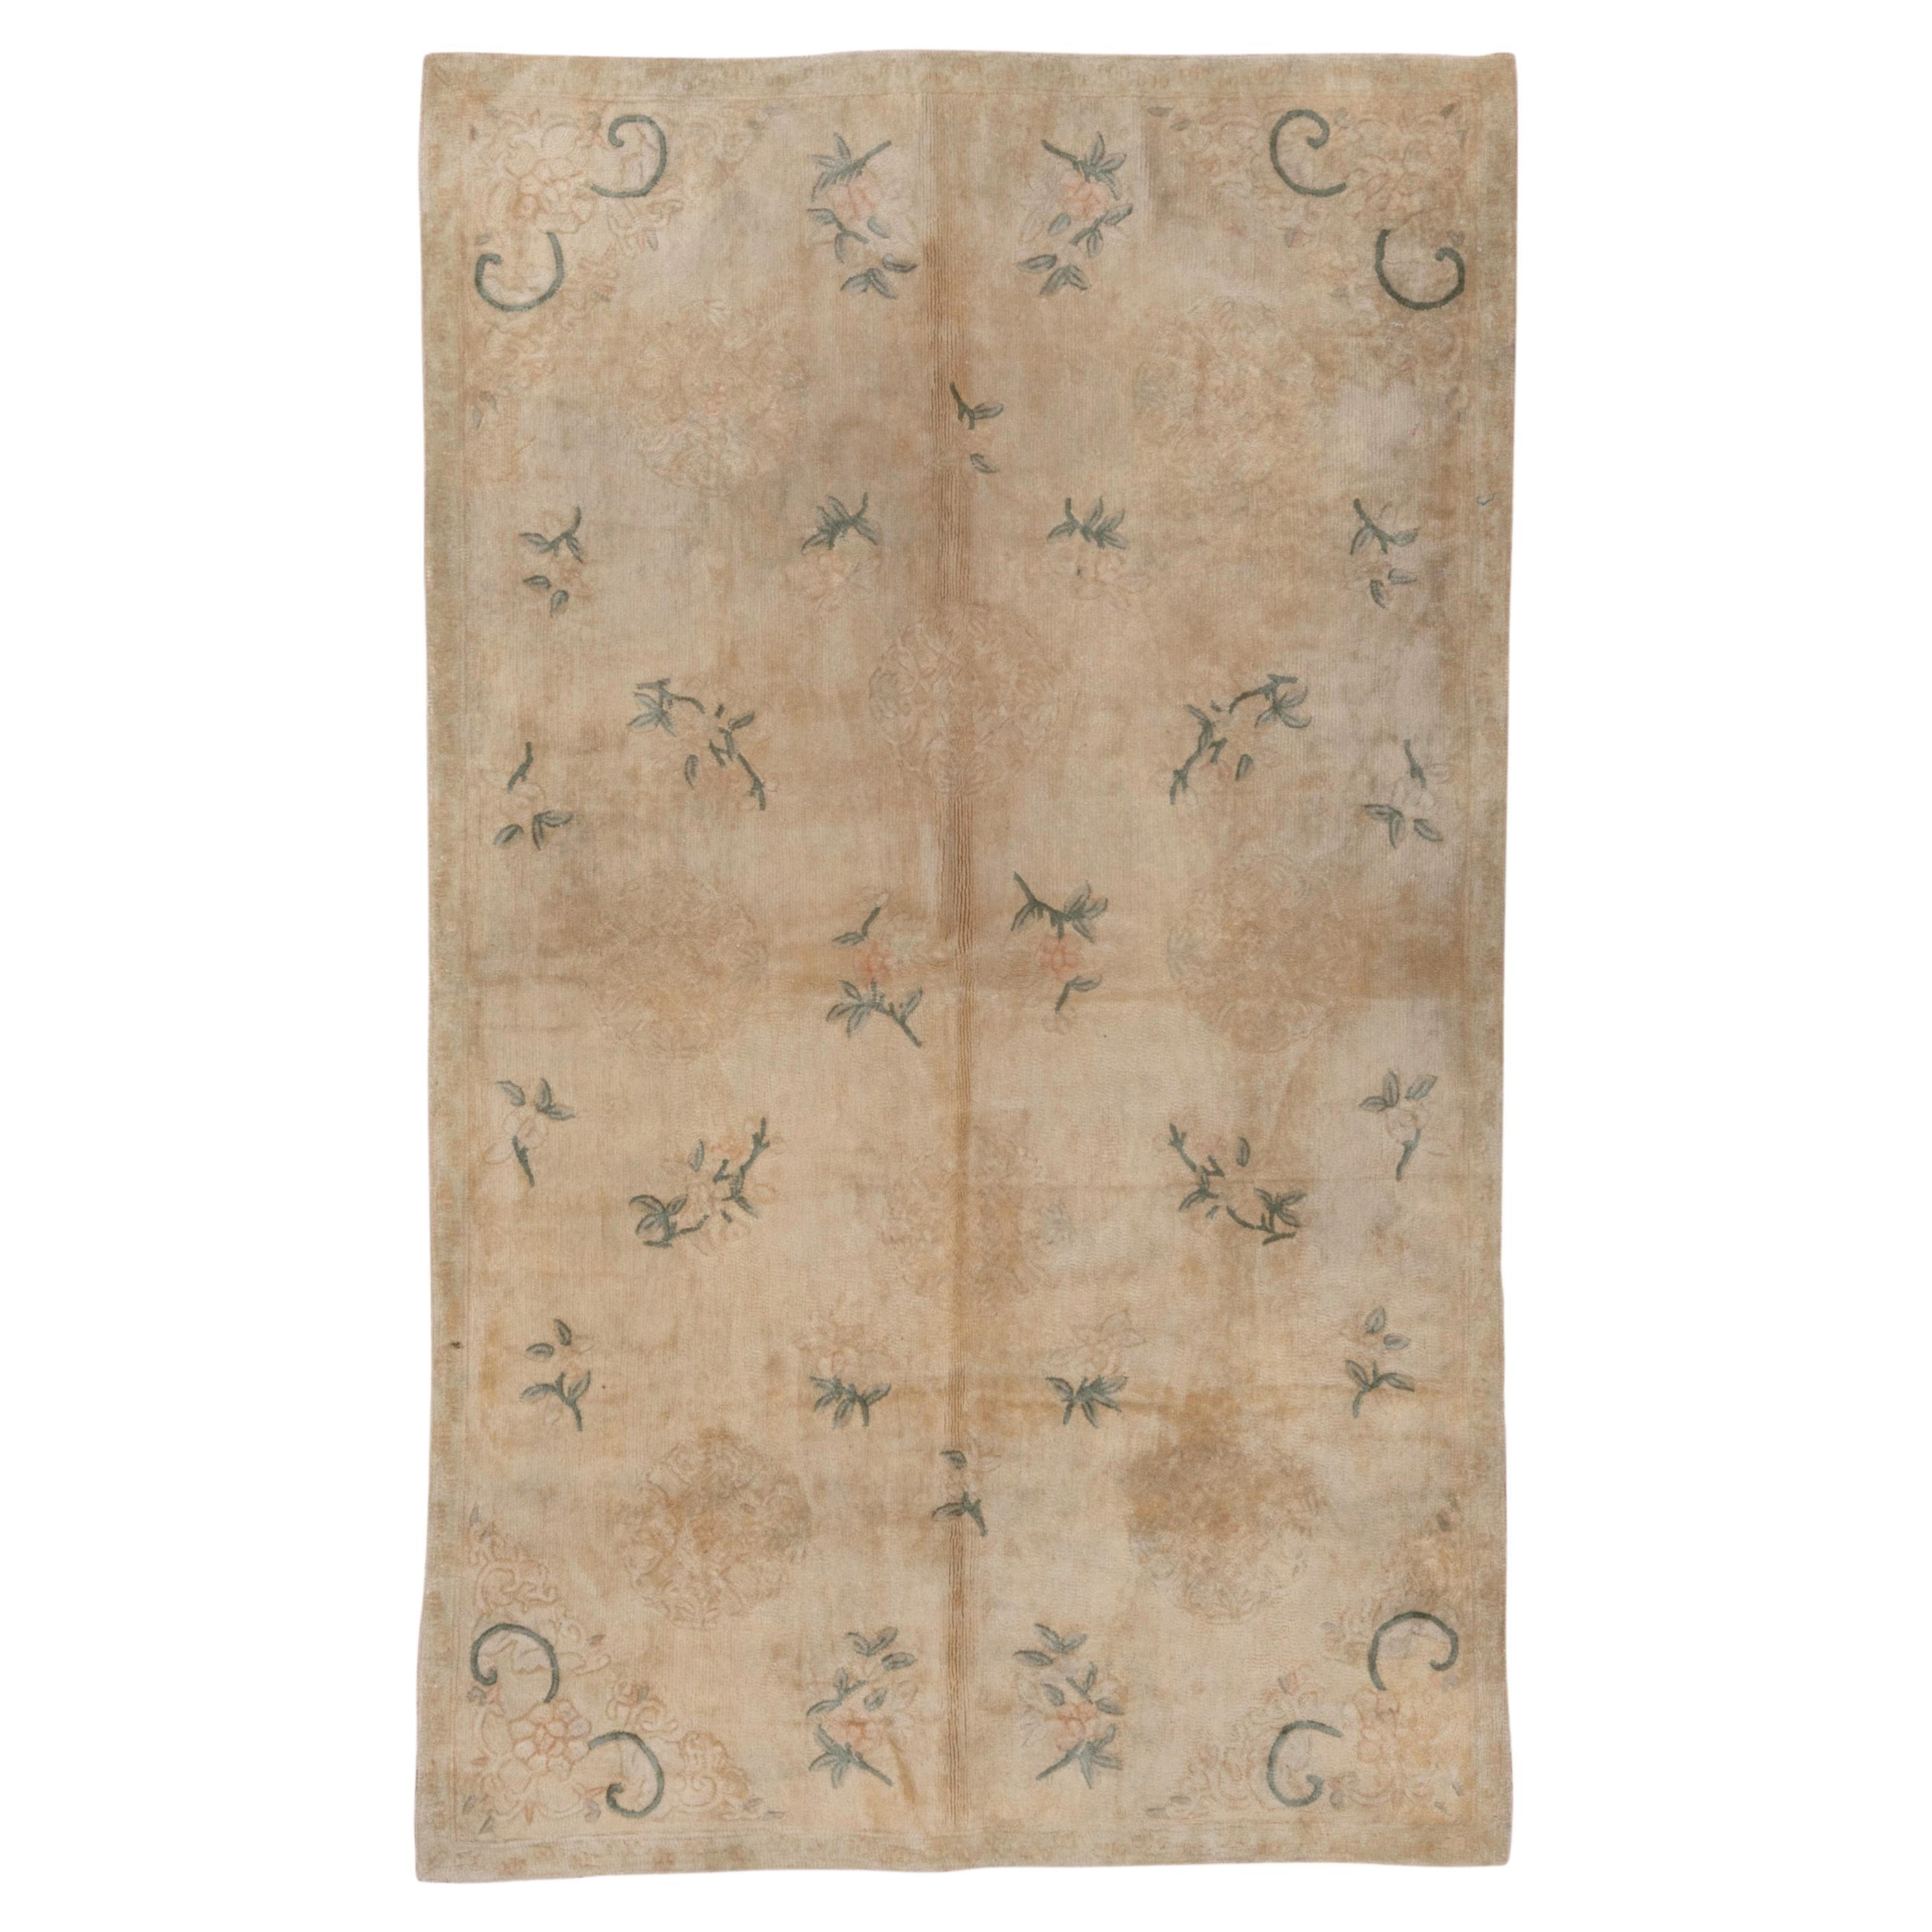 Antique Chinese Needlework Rug with Beige Field and Floral Design For Sale